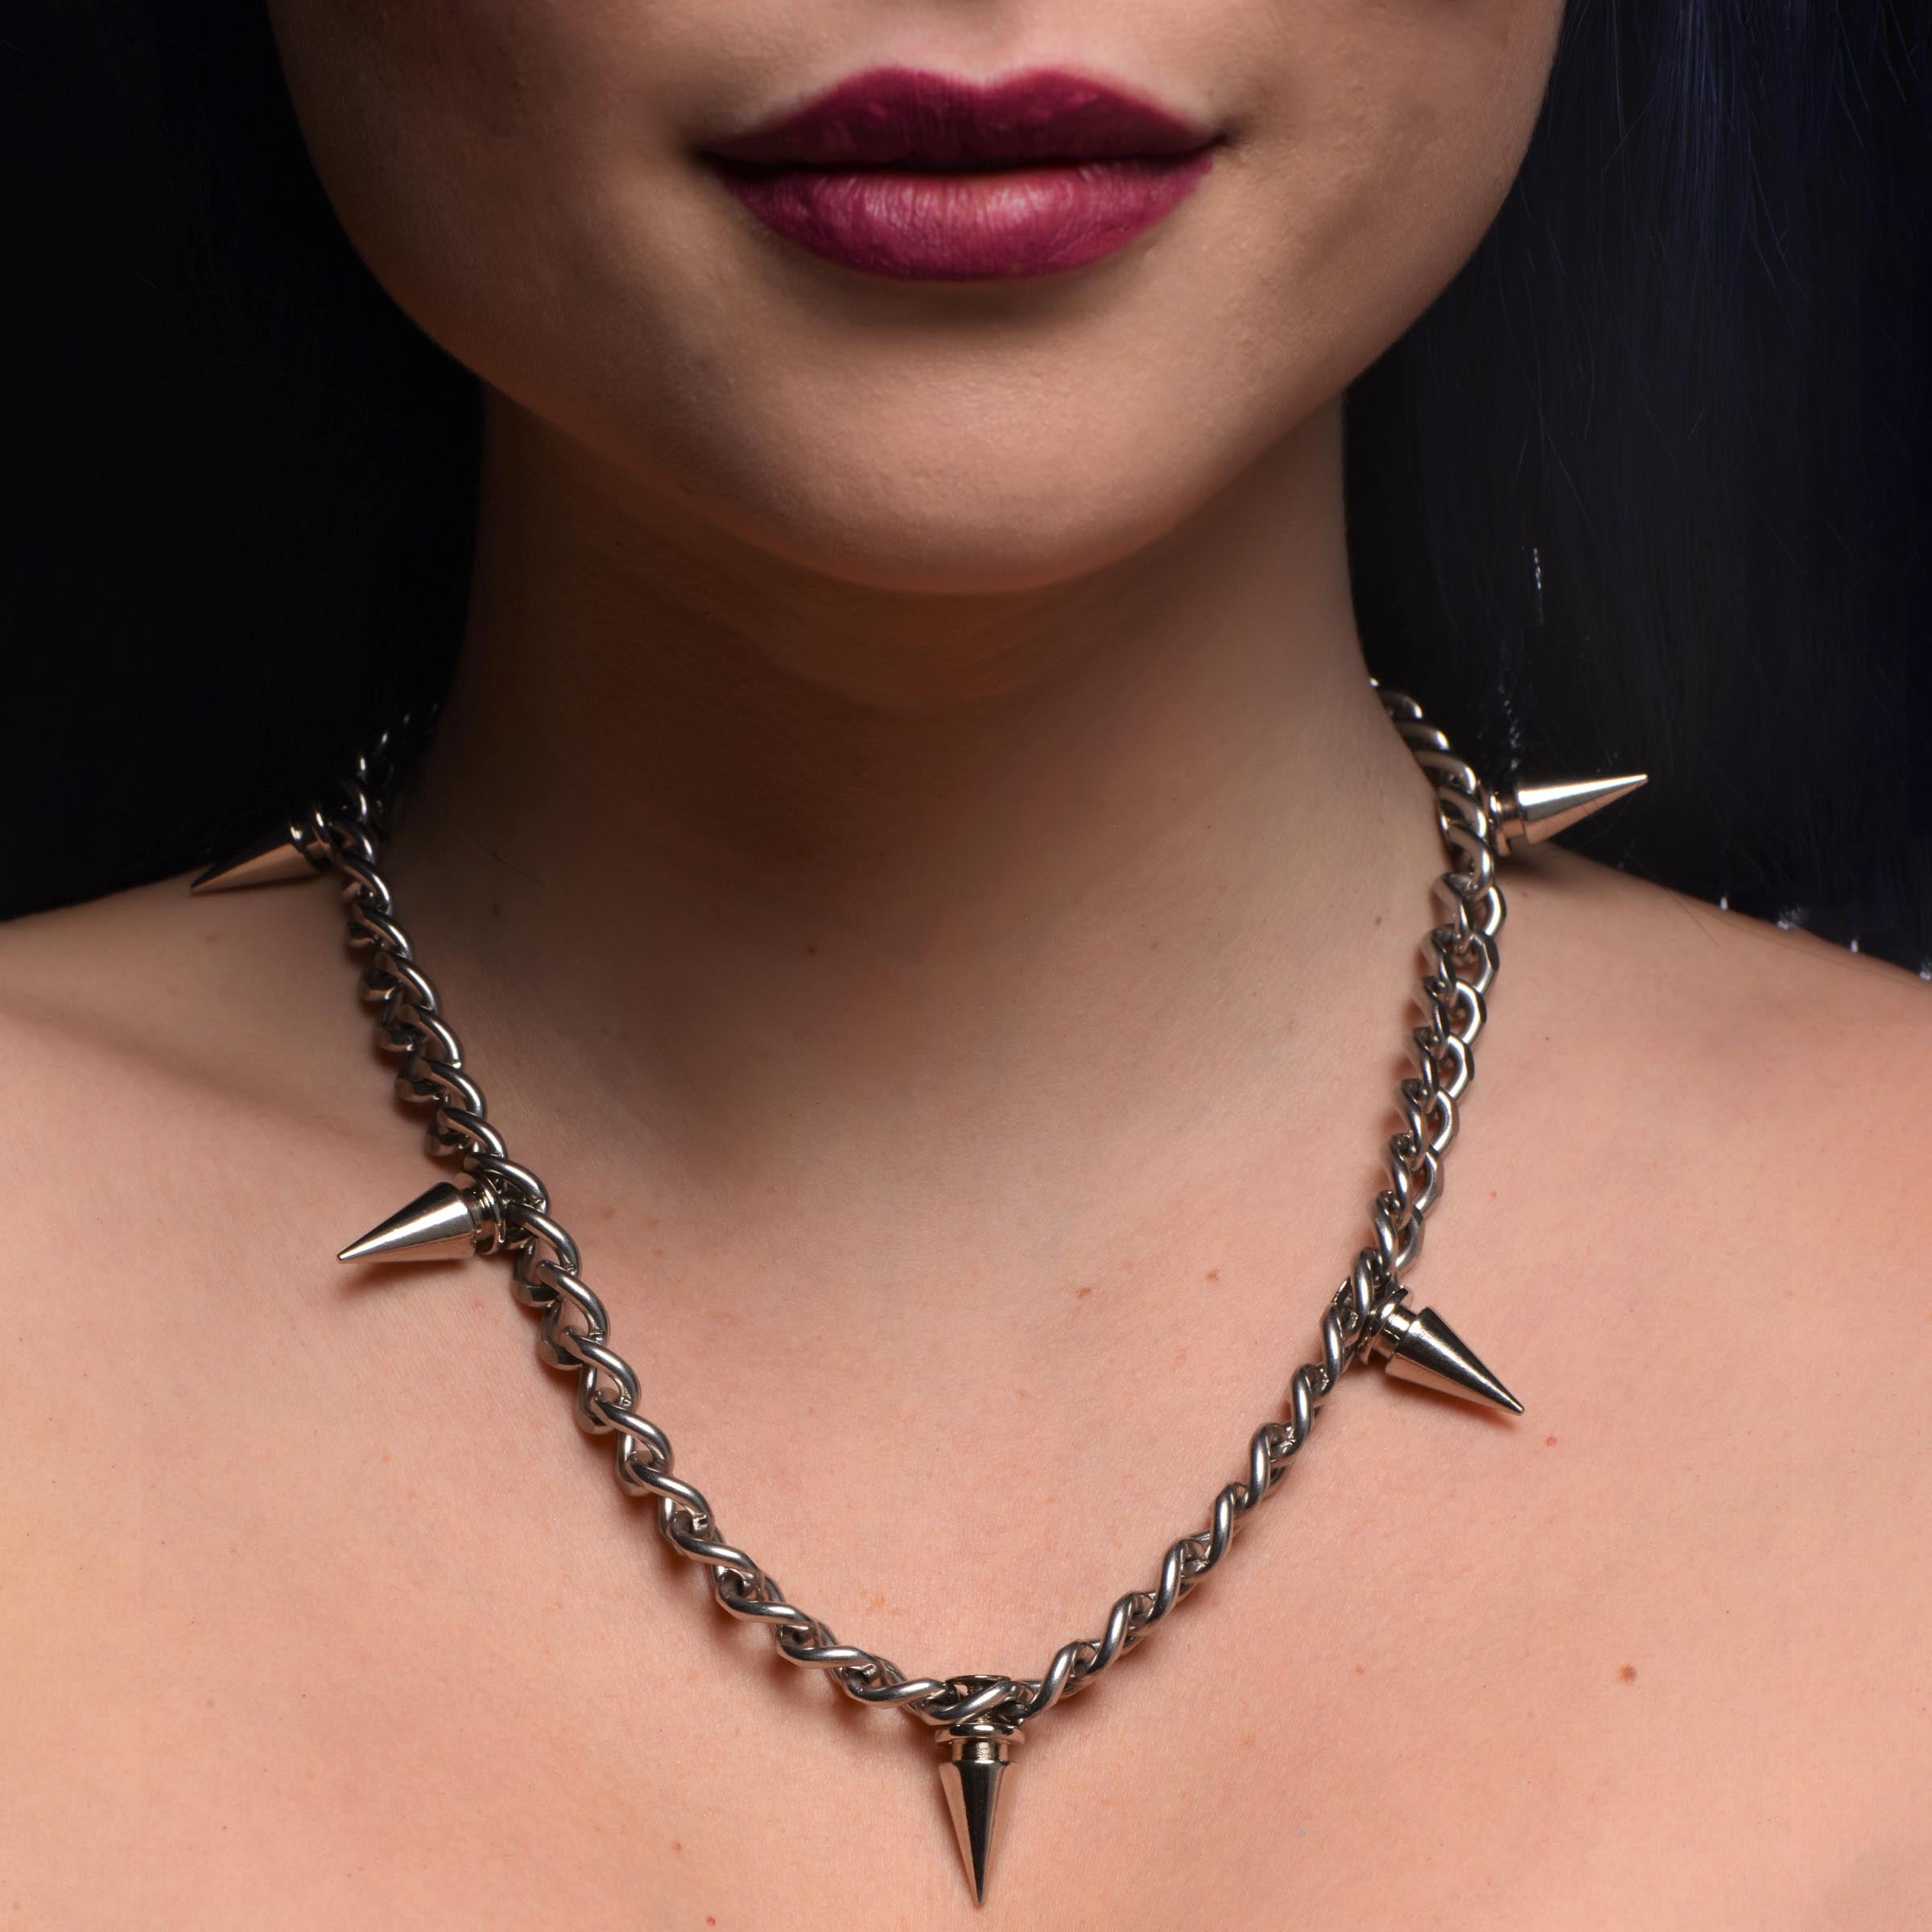 Spiked Punk Necklace